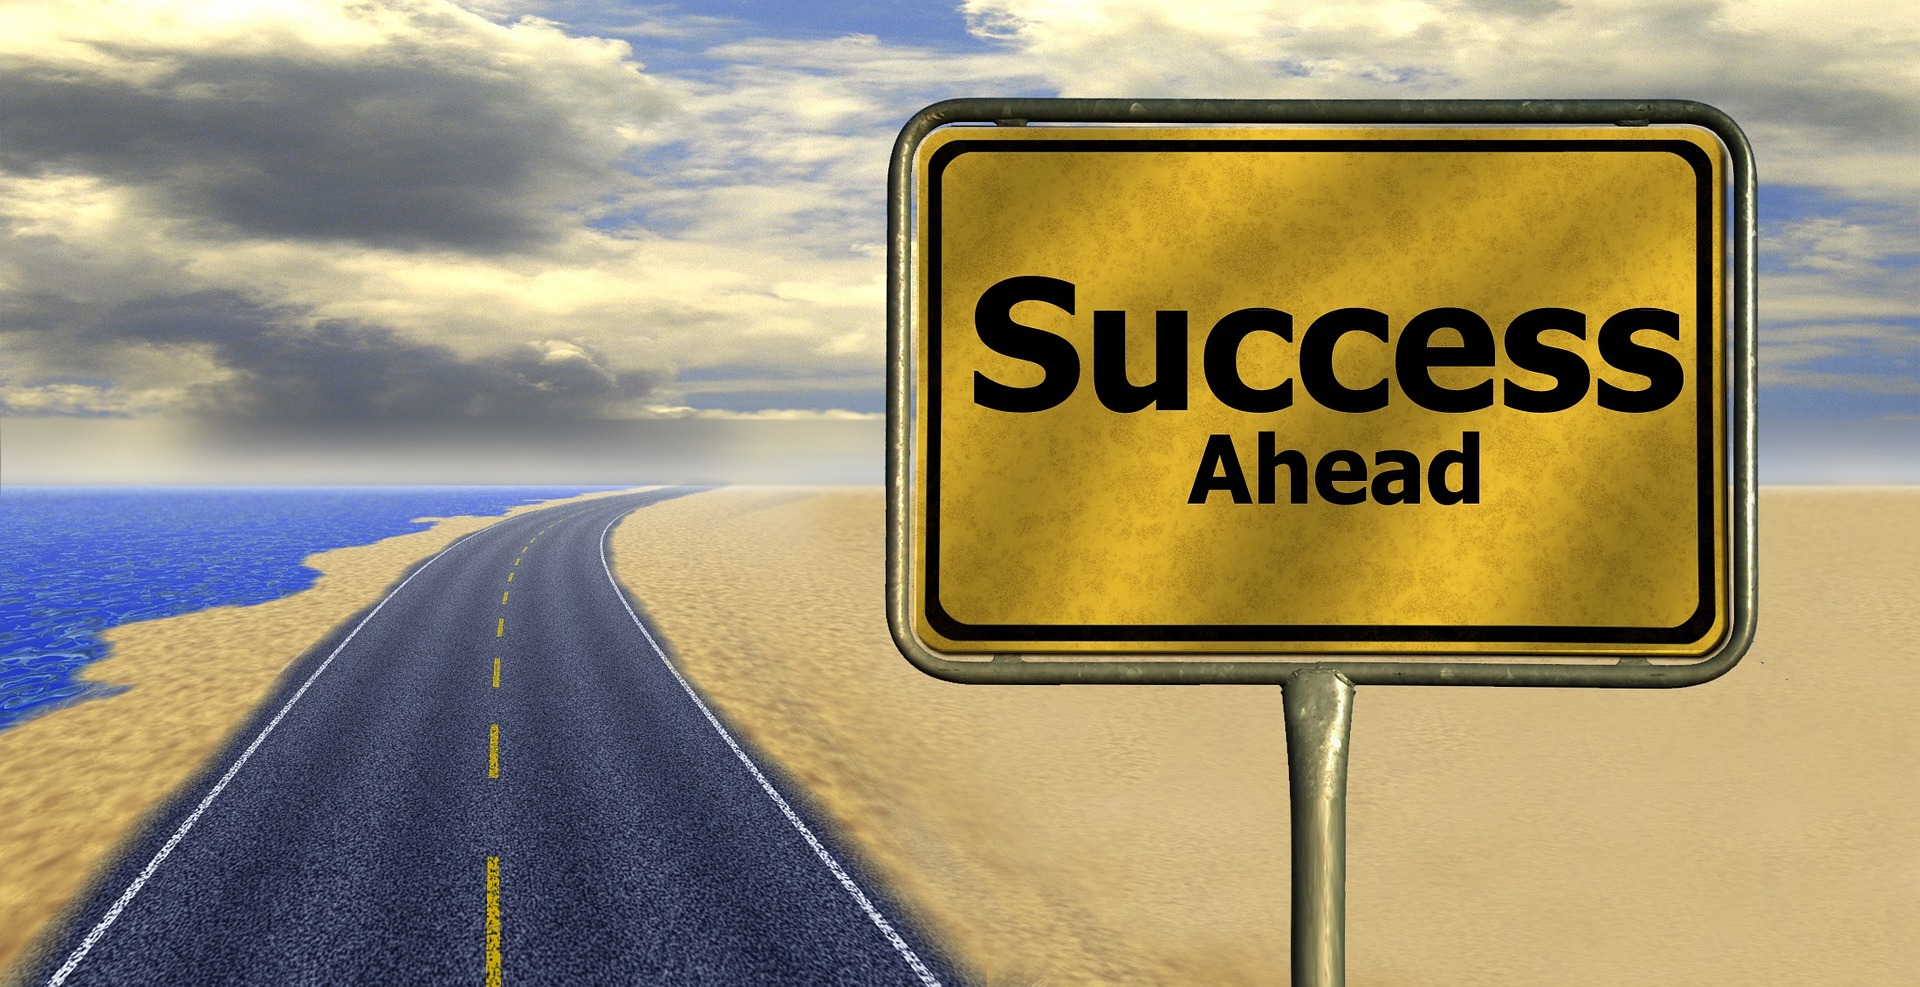 Image of a yellow road sign in the foreground with text saying "success ahead" and in the background an open road